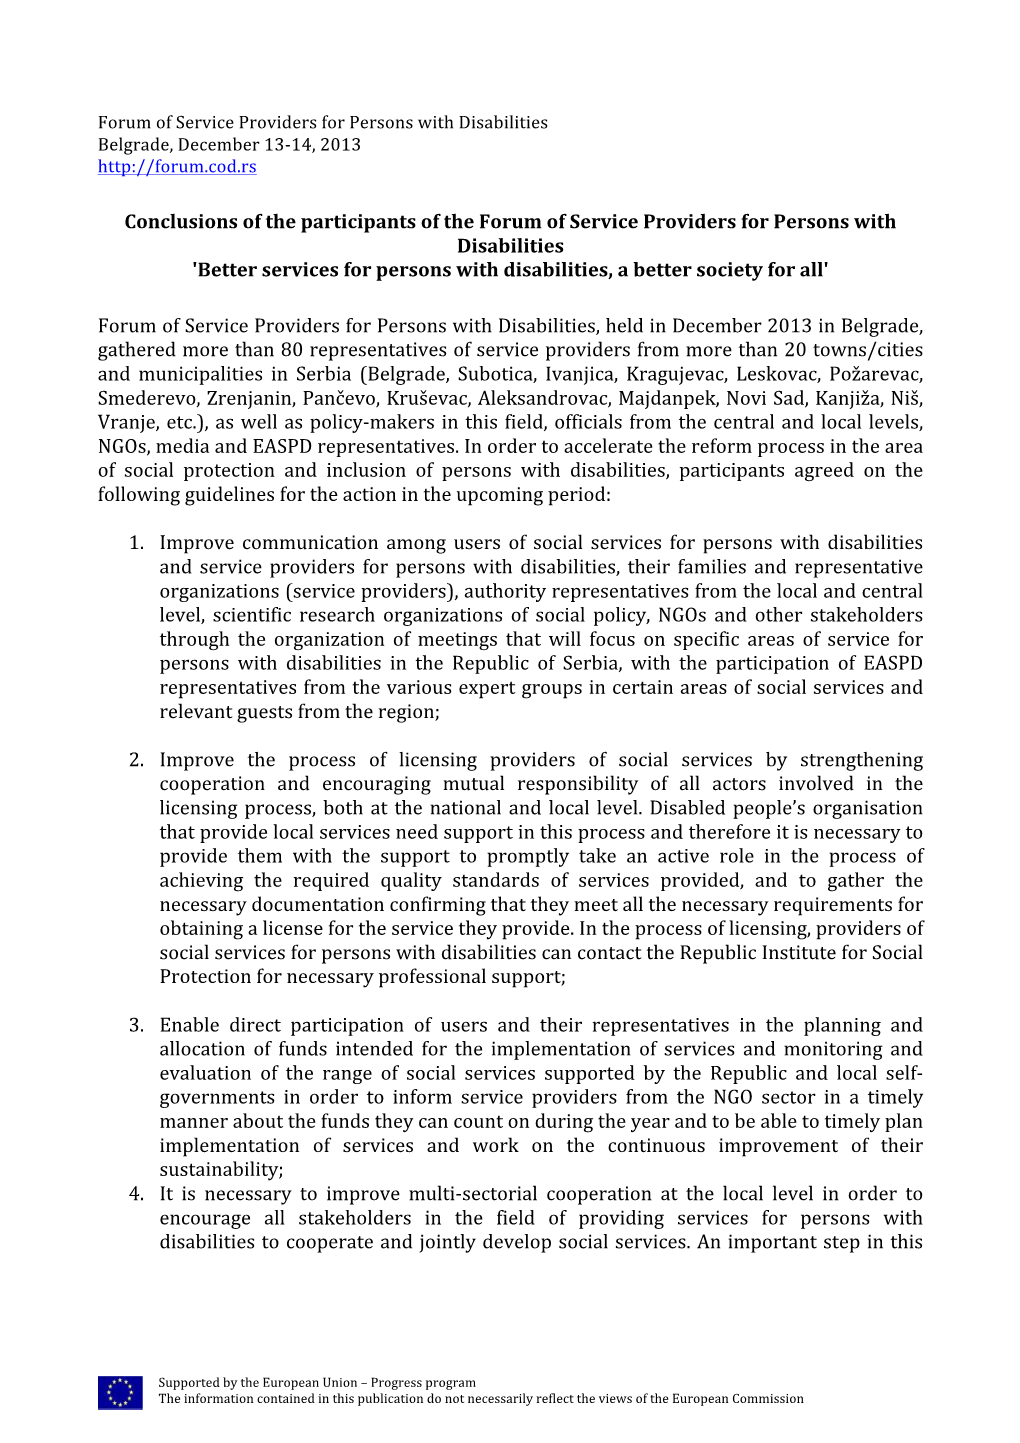 Conclusions of the Participants of the Forum of Service Providers For